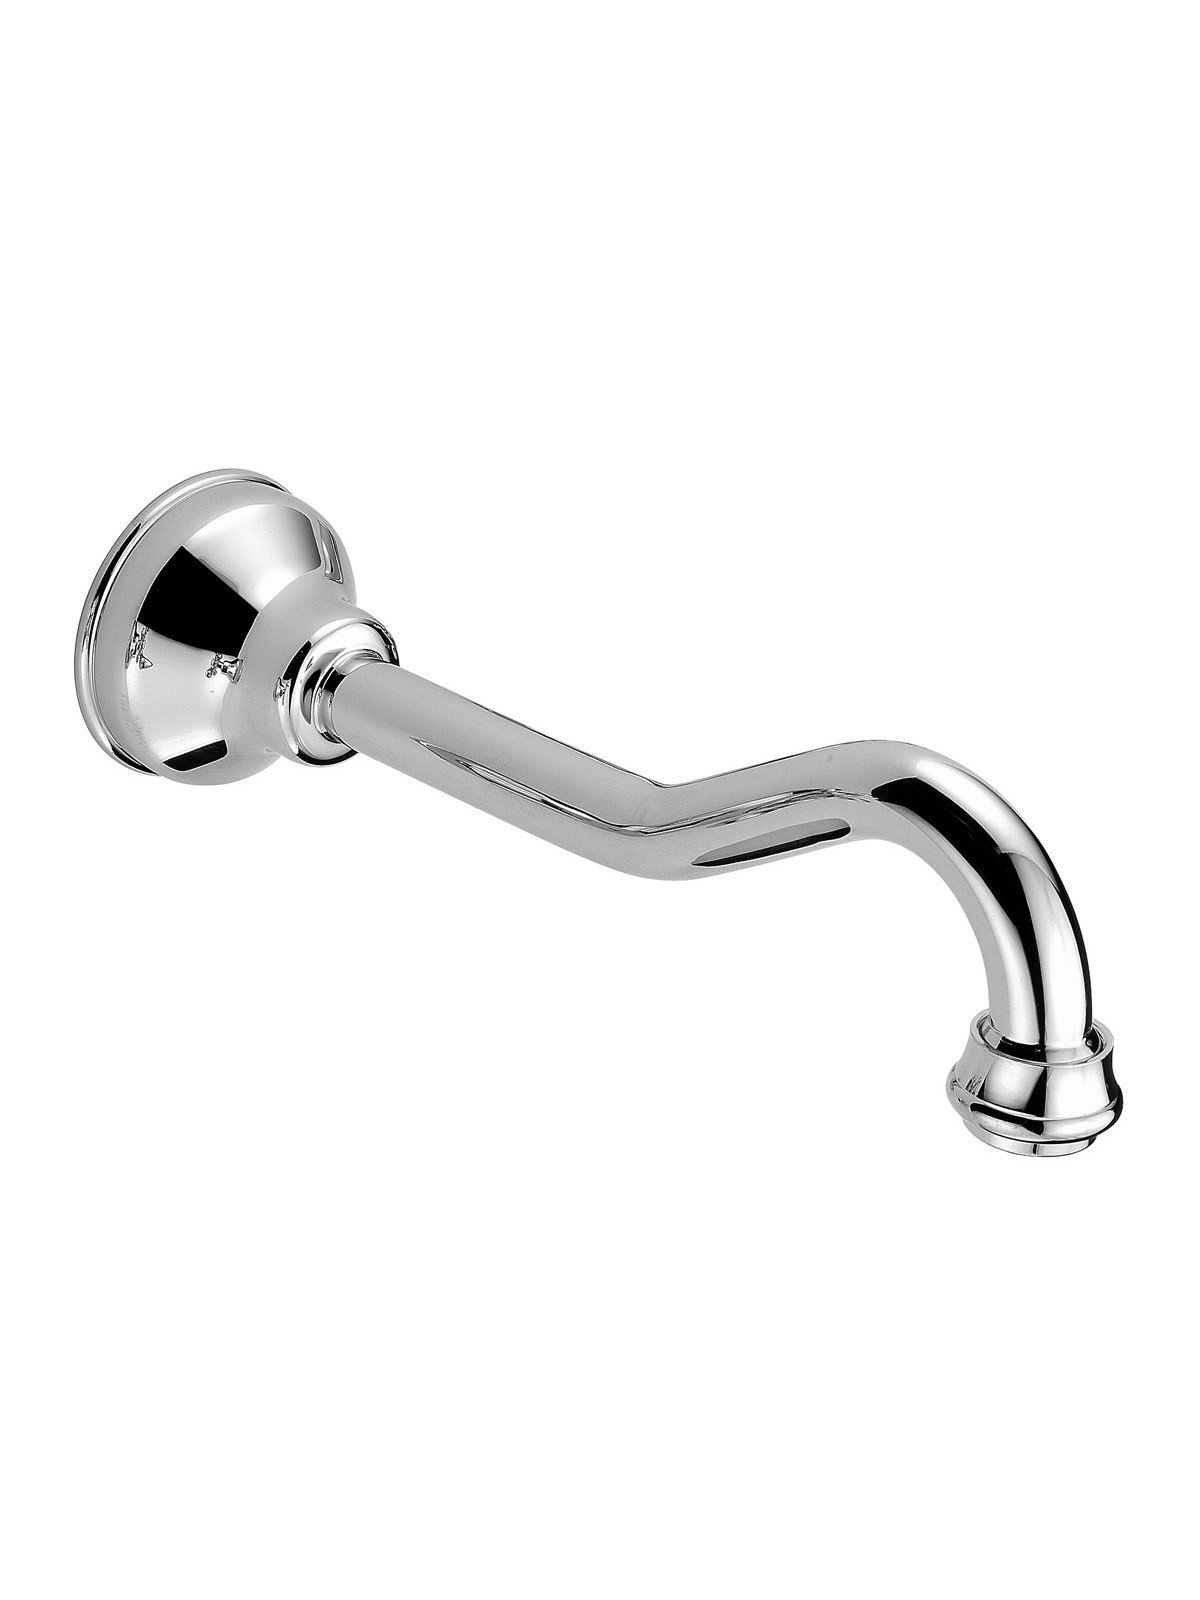 Wall-mounted spout for washbasin mixer - Dedra